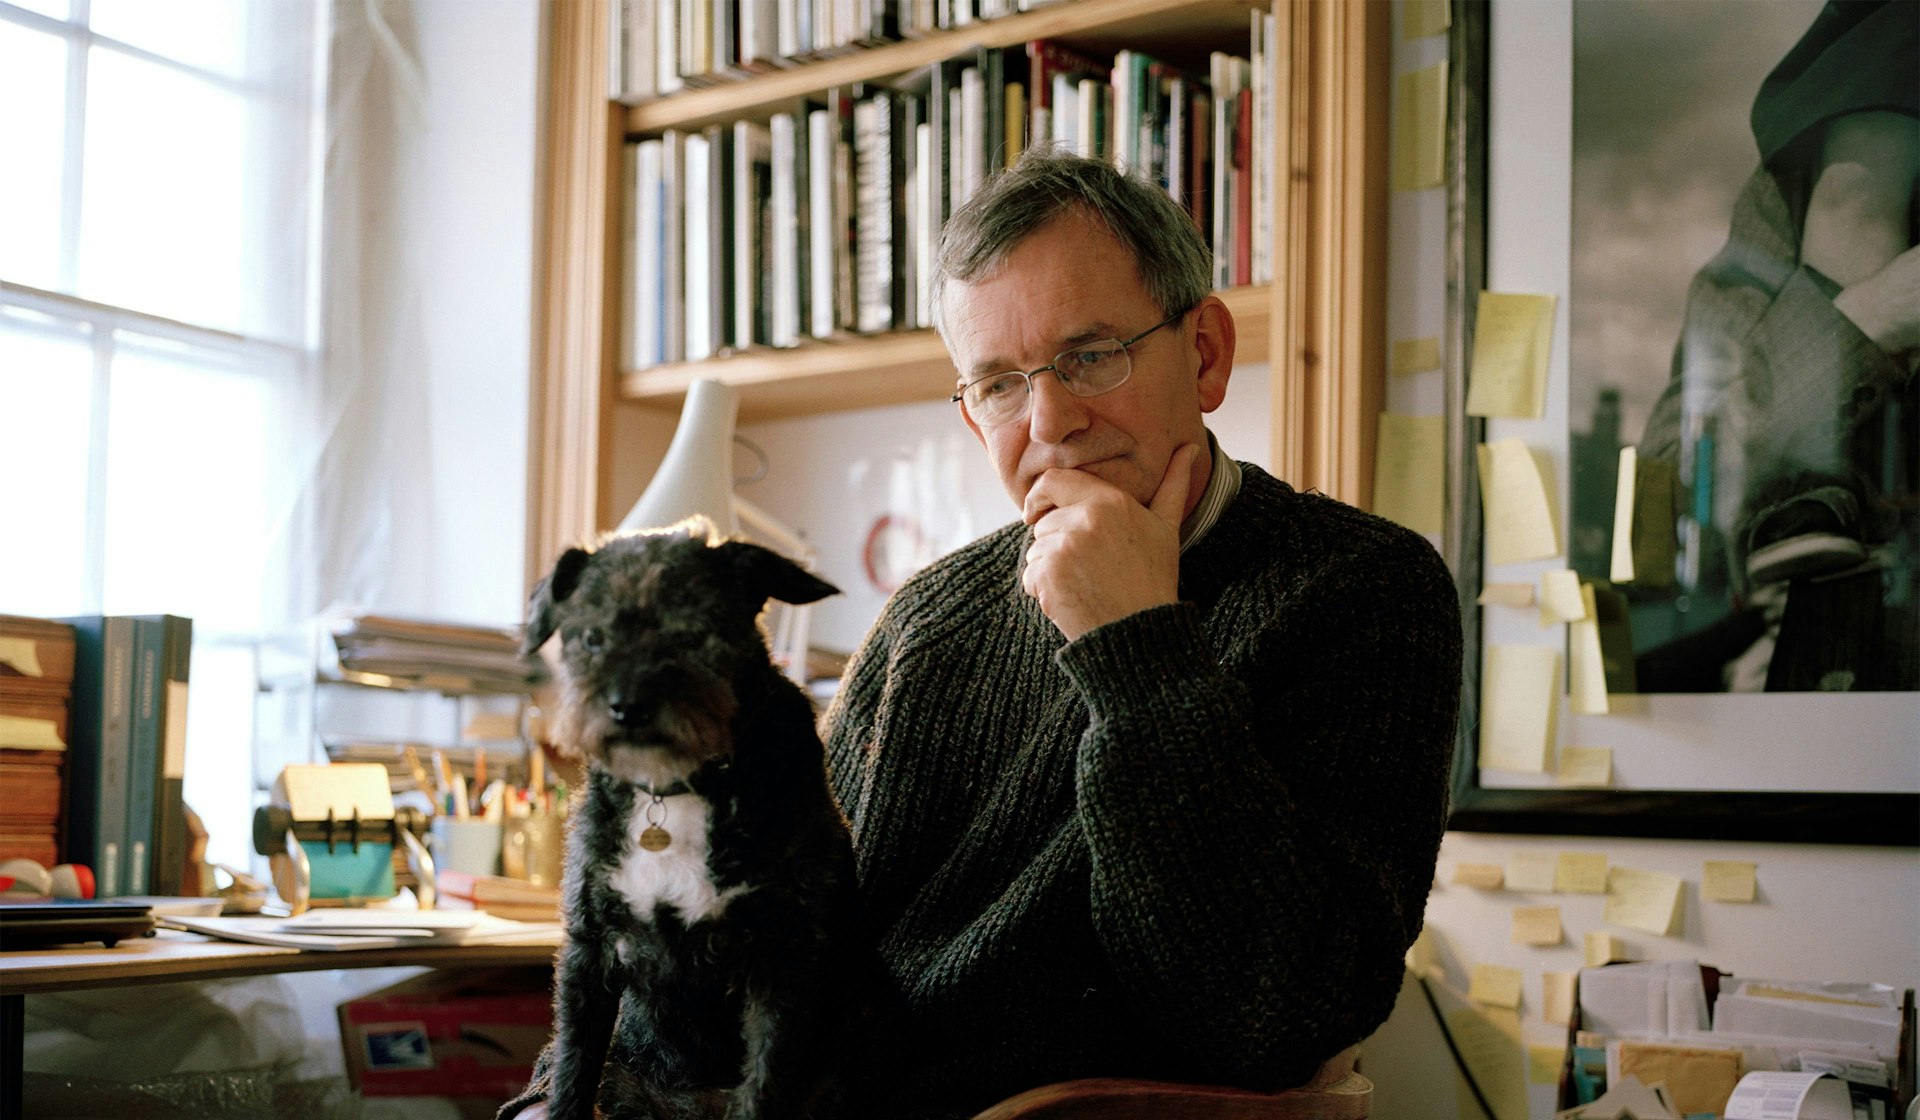 Martin Parr on the power of persistence